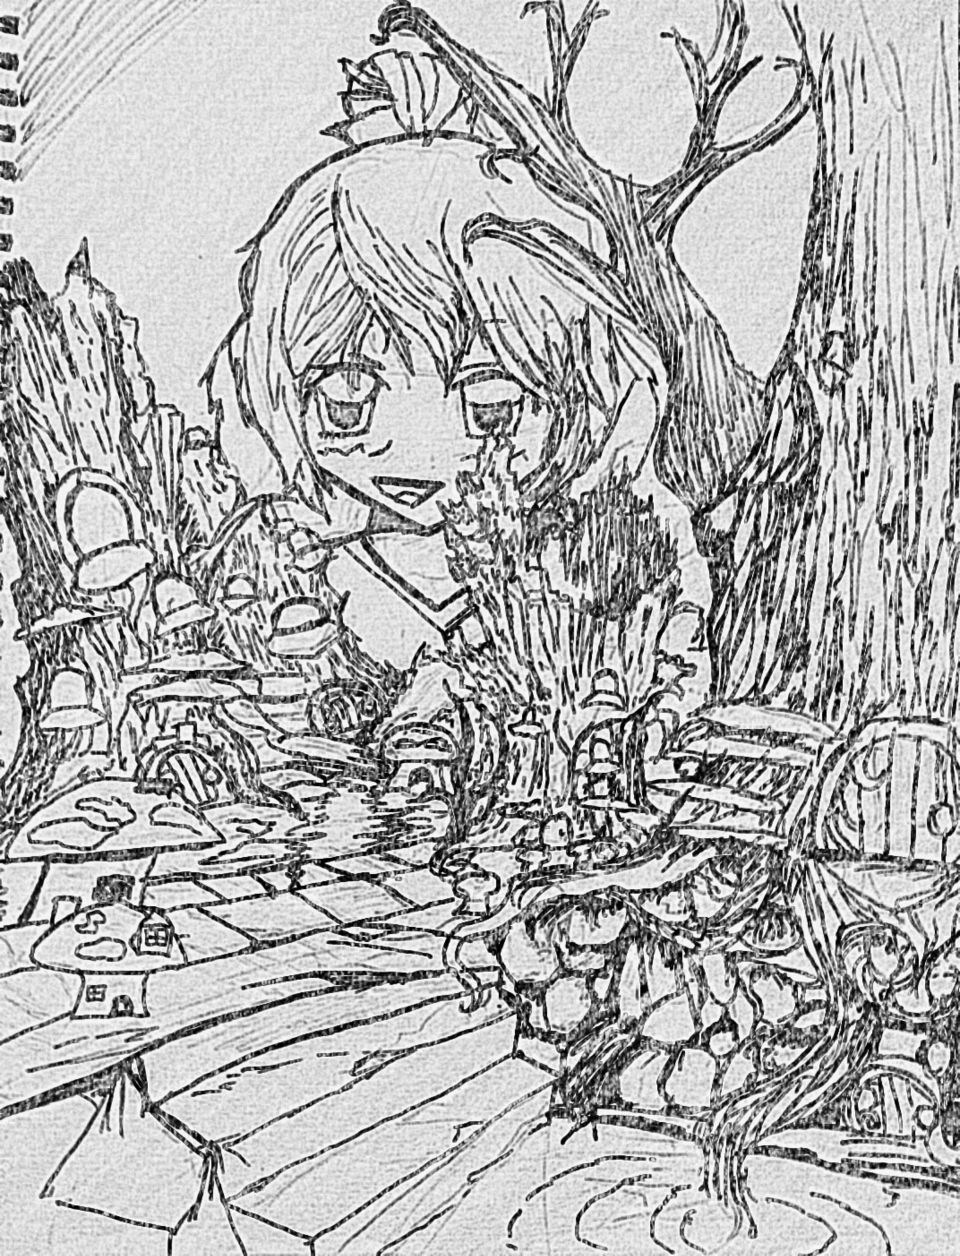 'Just a Pinch of Imagination' 
Anime Fantasy World Series: Black and White. 
I love fantasy, anime, and drawing. These components seem to fit perfectly as I have created a black and white version.